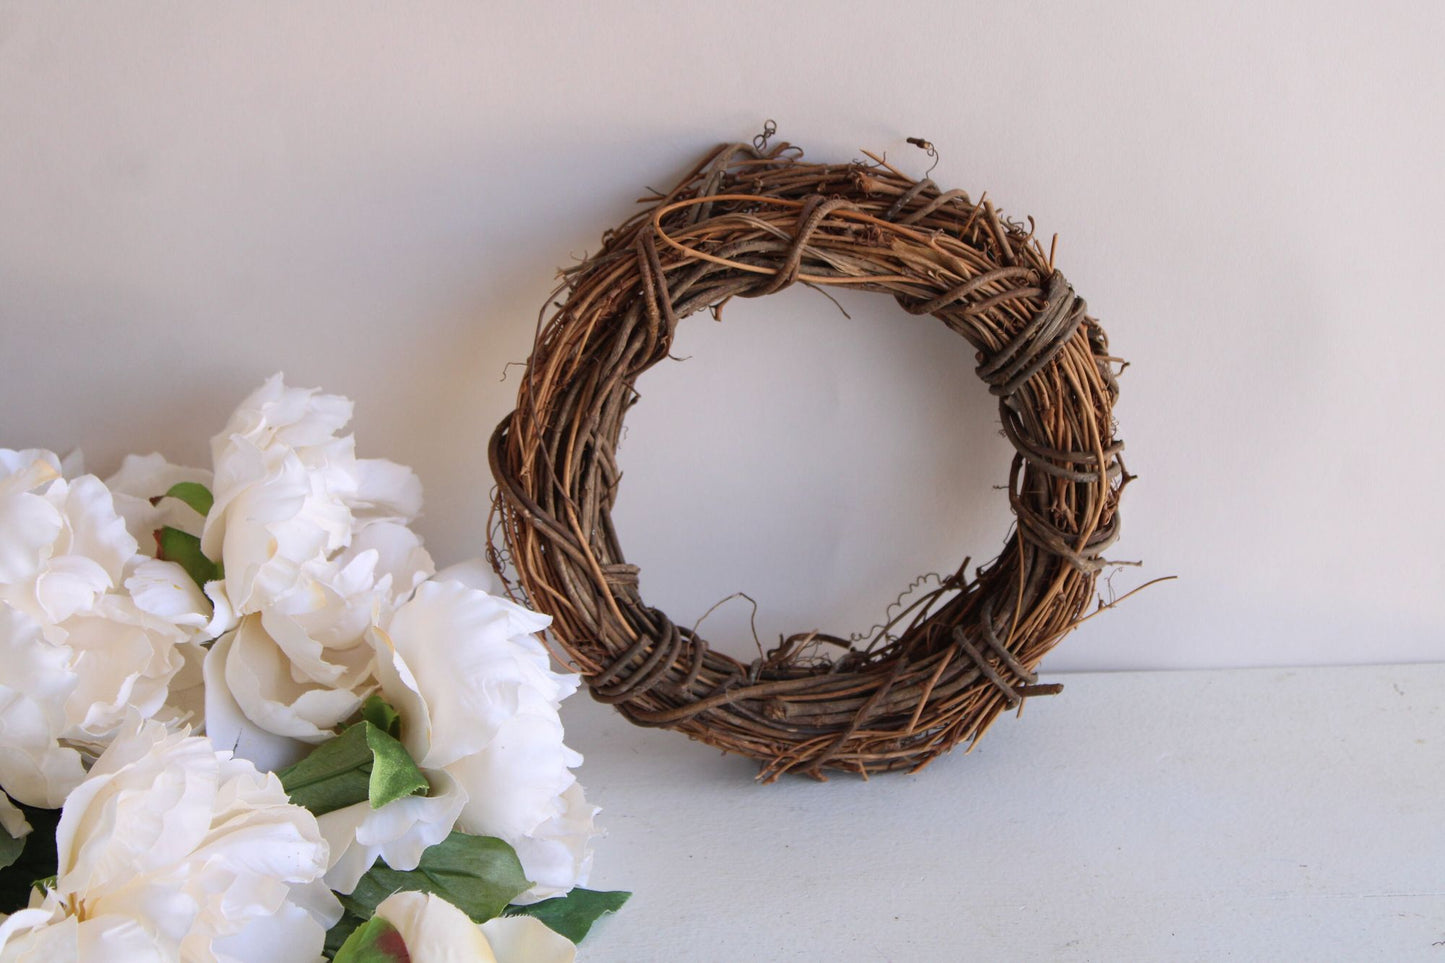 Grapevine Wreath, NOS, 6" Diameter, Single or Double, Natural Round